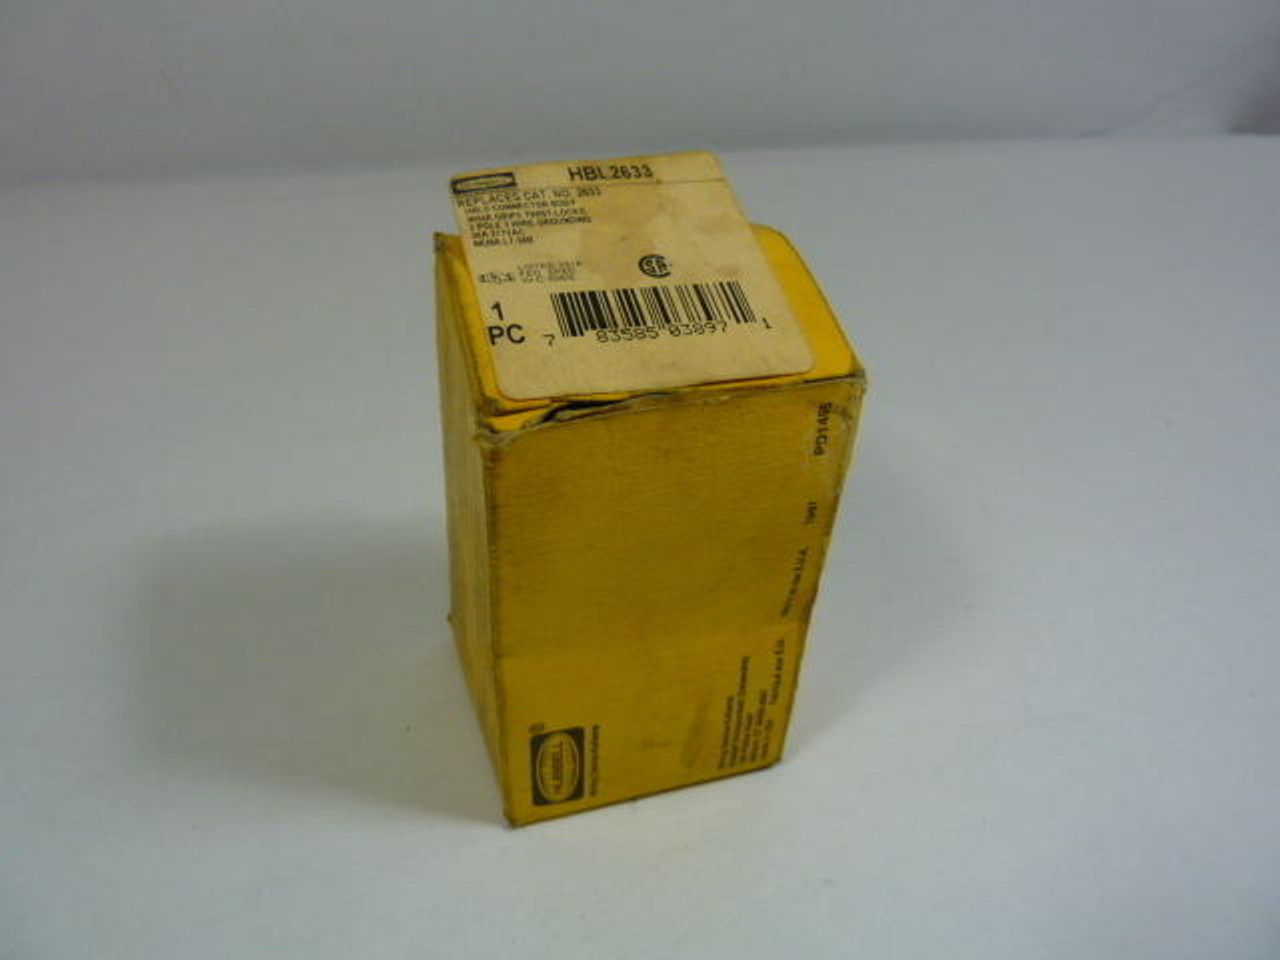 Hubbell HBL2633 Receptacle 30A 2P 277VAC ! NEW !